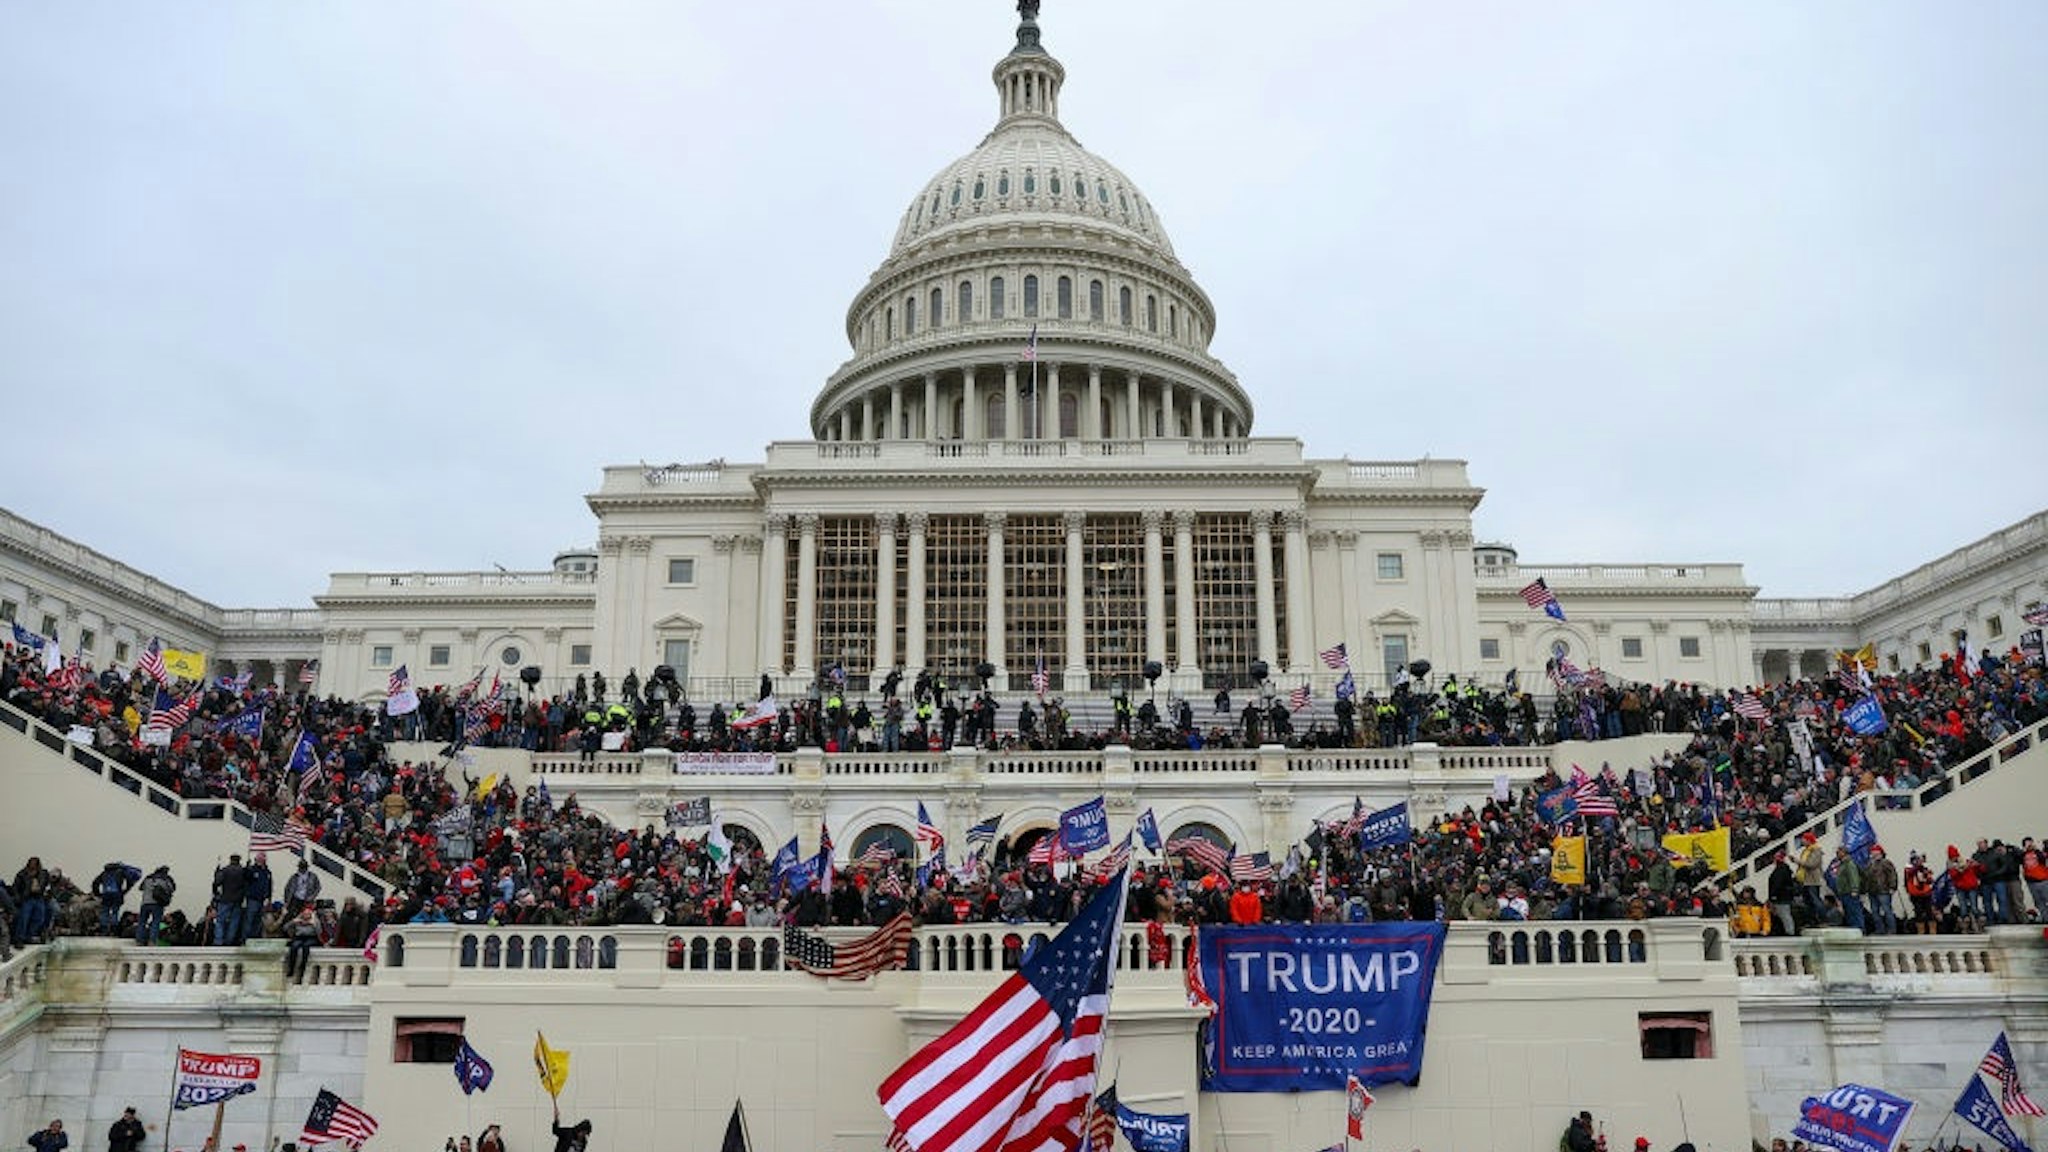 WASHINGTON D.C., USA - JANUARY 6: US President Donald Trumps supporters gather outside the Capitol building in Washington D.C., United States on January 06, 2021.